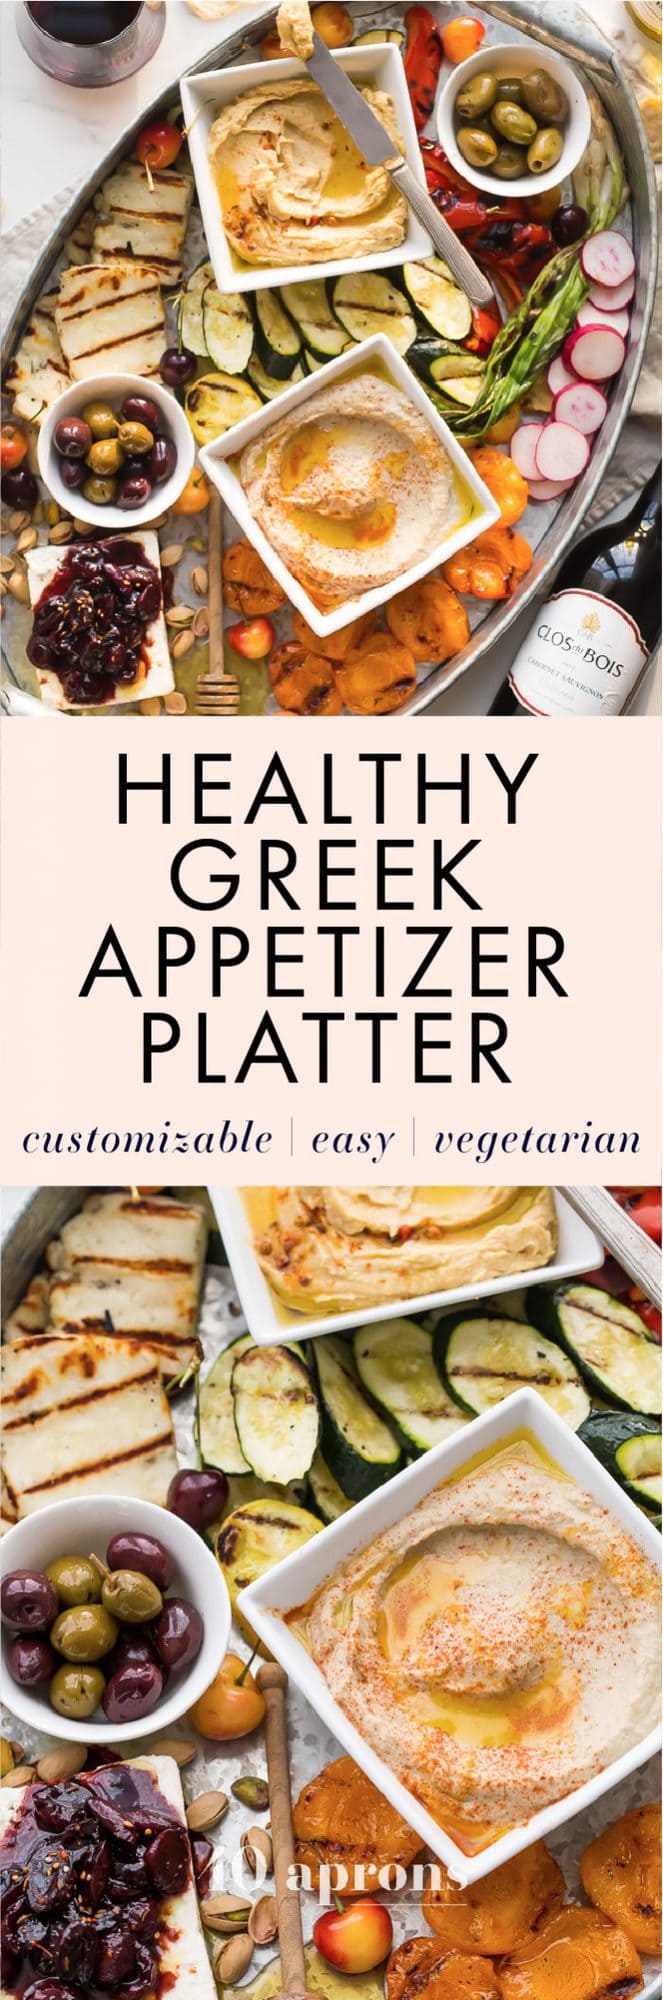 This healthy Greek appetizer platter is perfect for summer entertaining, loaded with healthy make-ahead appetizers you can customize to your own tastes. One of my favorite healthy appetizers! My healthy Greek appetizer platter includes Mediterranean dips and spreads, grilled veggies, fruits, and halloumi, fresh fruit, nuts, and feta topped with a rich, fruity reduction. If you're doing some summer entertaining soon or looking for great healthy appetizers, this healthy Greek appetizer platter is just the thing you need! 